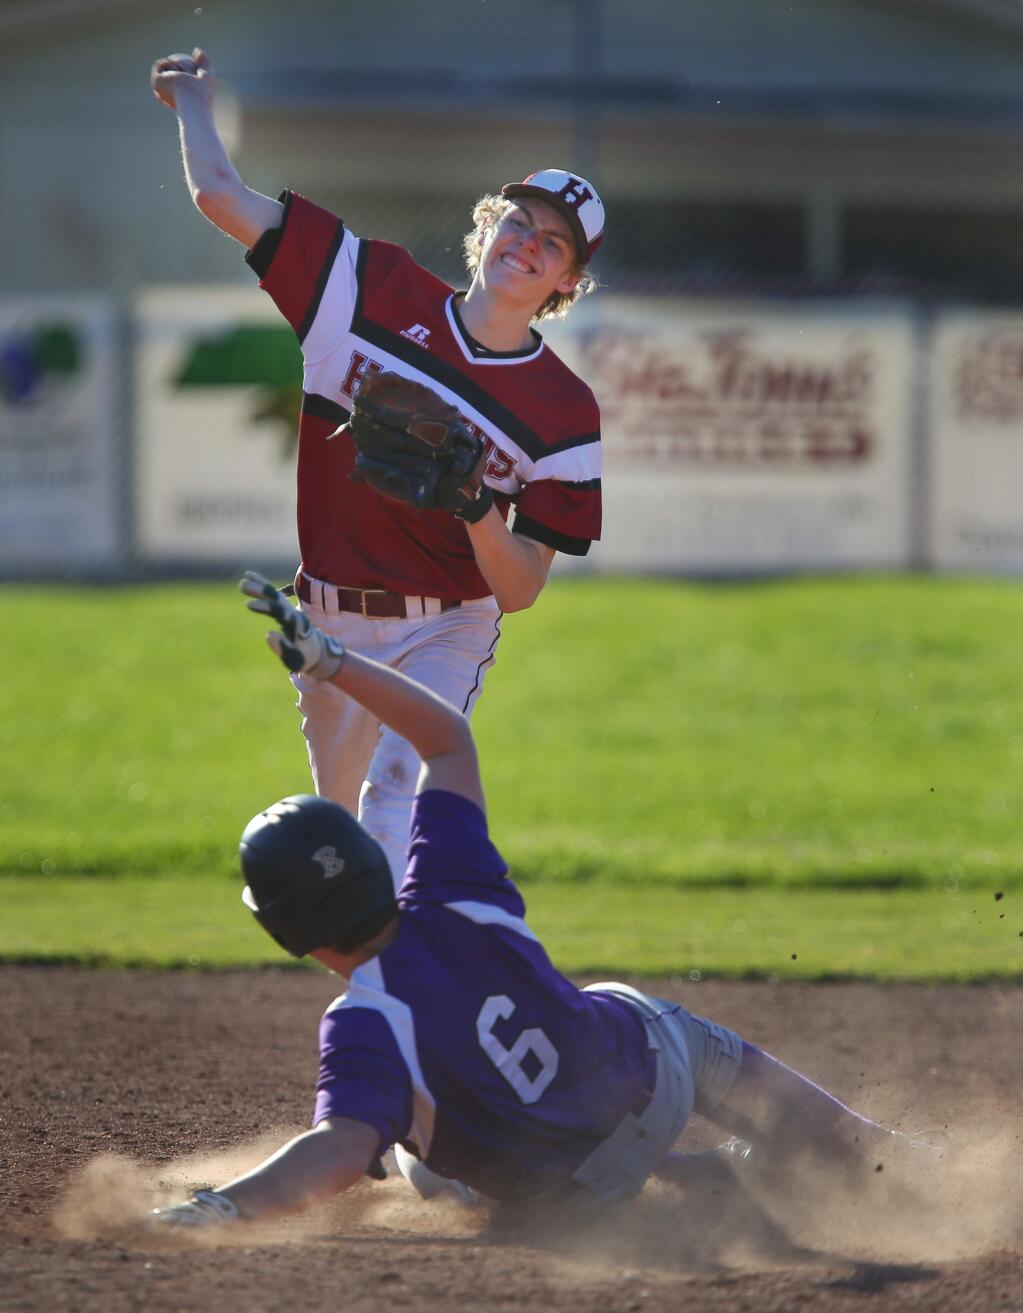 Healdsburg's Jacob Pruitt tries to turn the double play as Fort Bragg's Colton Hopper slides into second, during their preseason game in Healdsburg, on Wednesday, March 16, 2016. (Christopher Chung/ The Press Democrat)